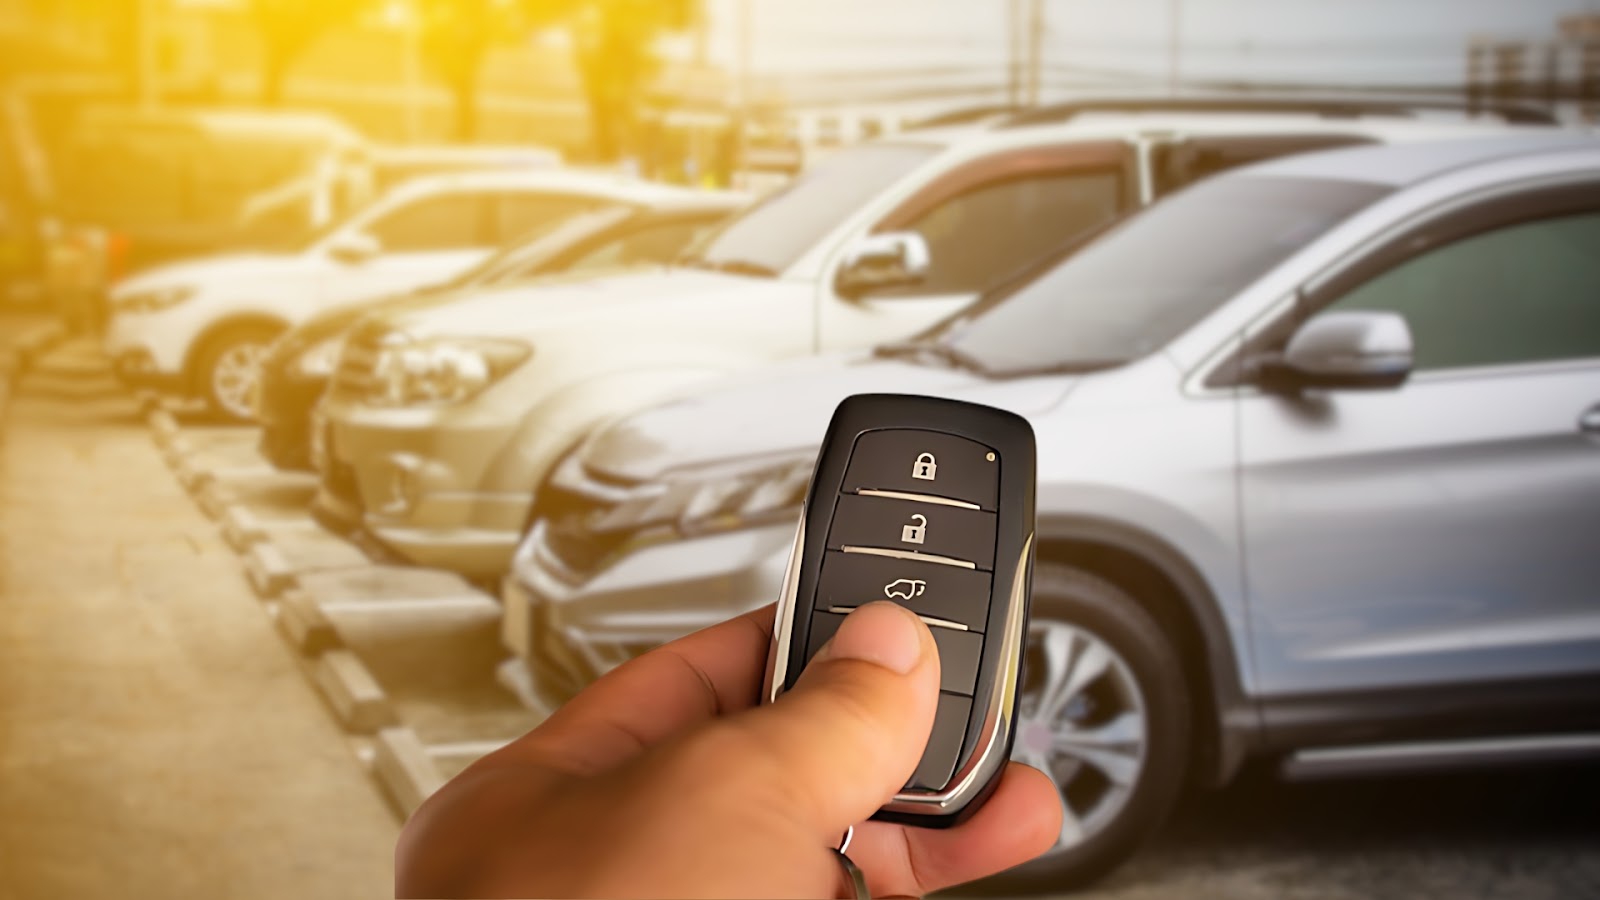 A car owner is holding a smart car key to unlock or start a vehicle remotely in a busy car parking lot.